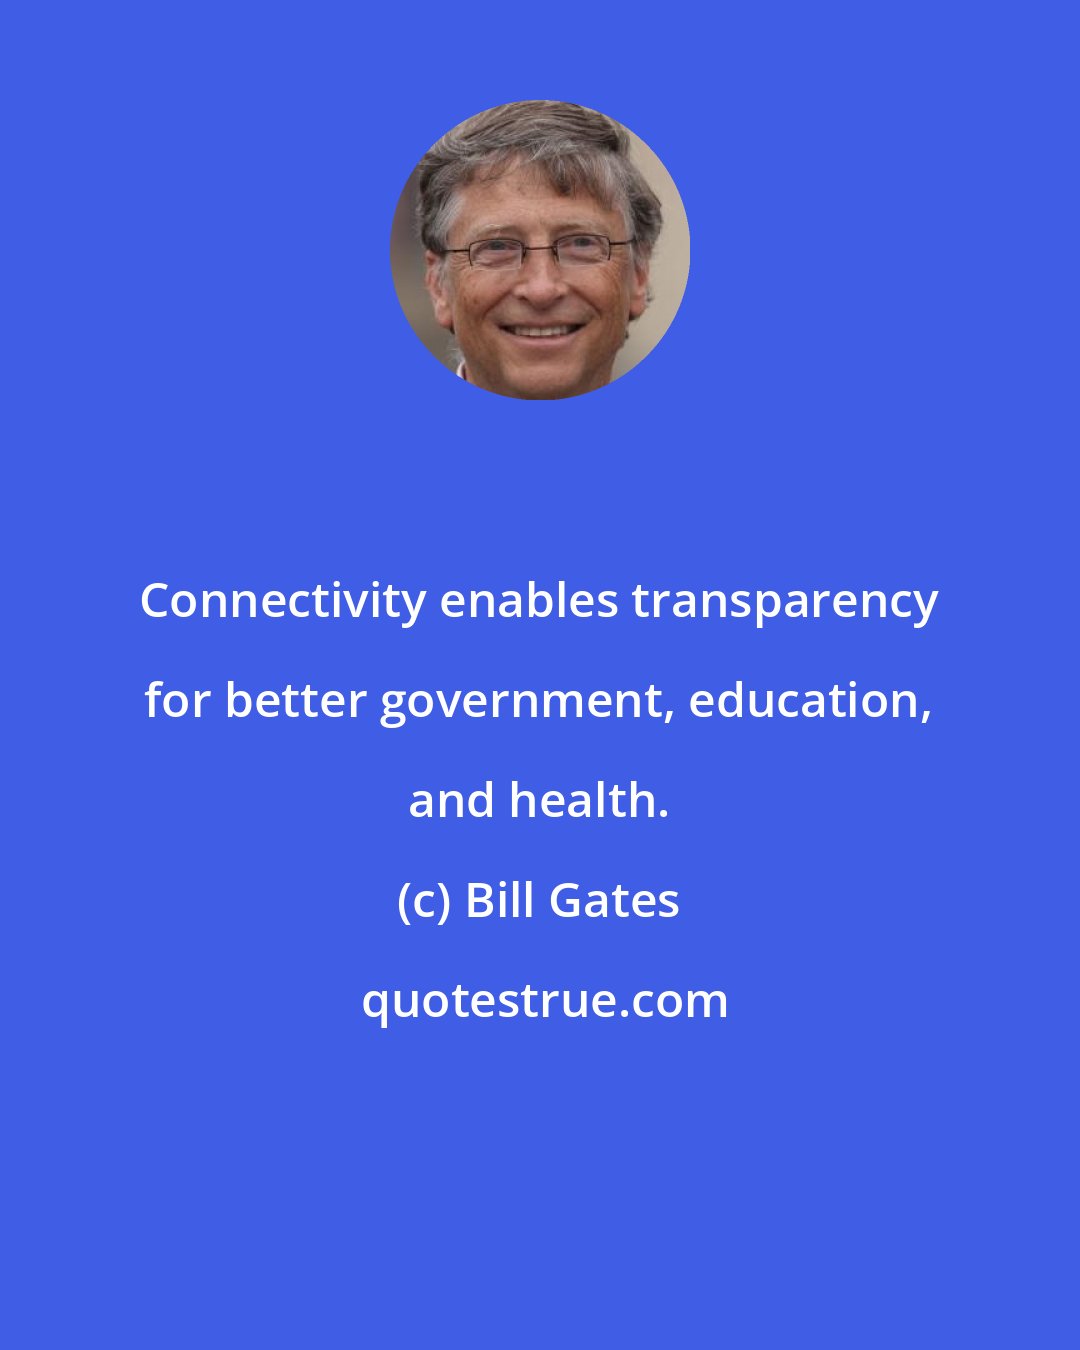 Bill Gates: Connectivity enables transparency for better government, education, and health.